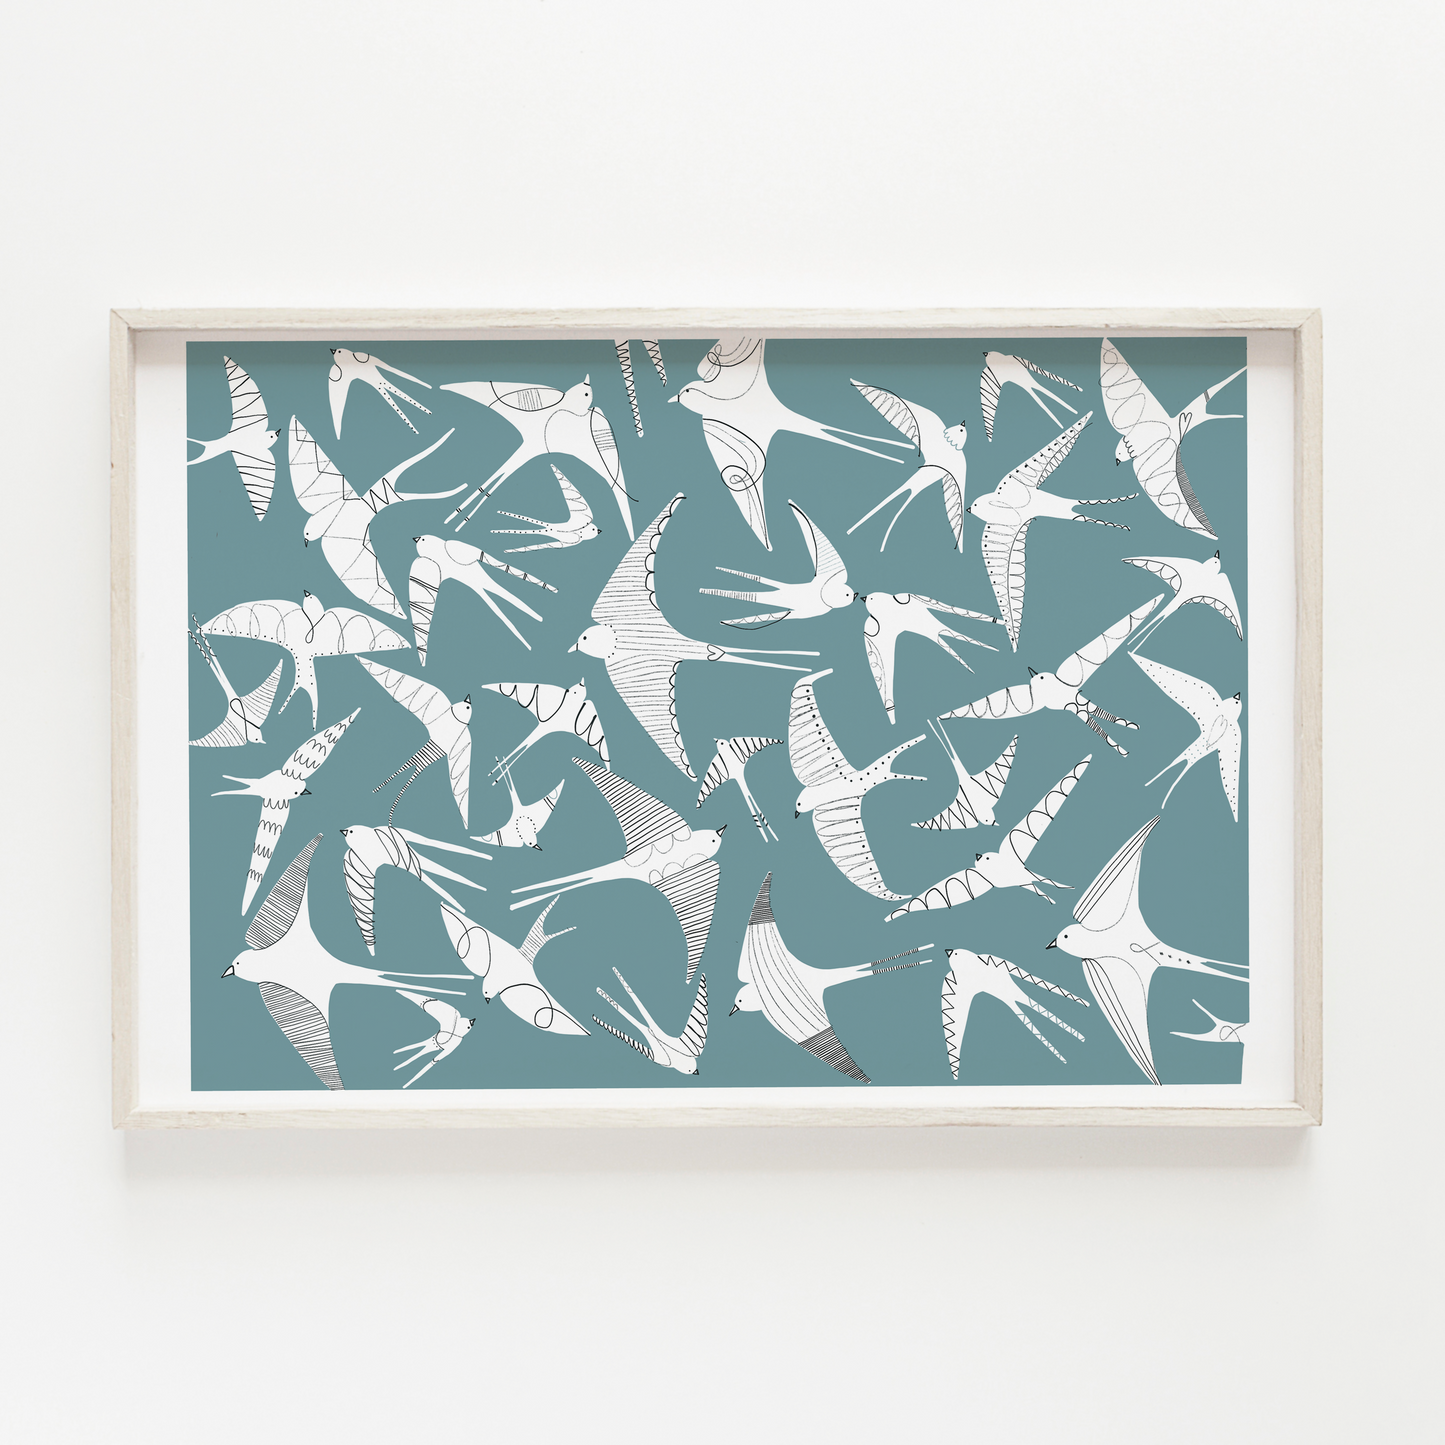 A Swoop of Swallows Art Print